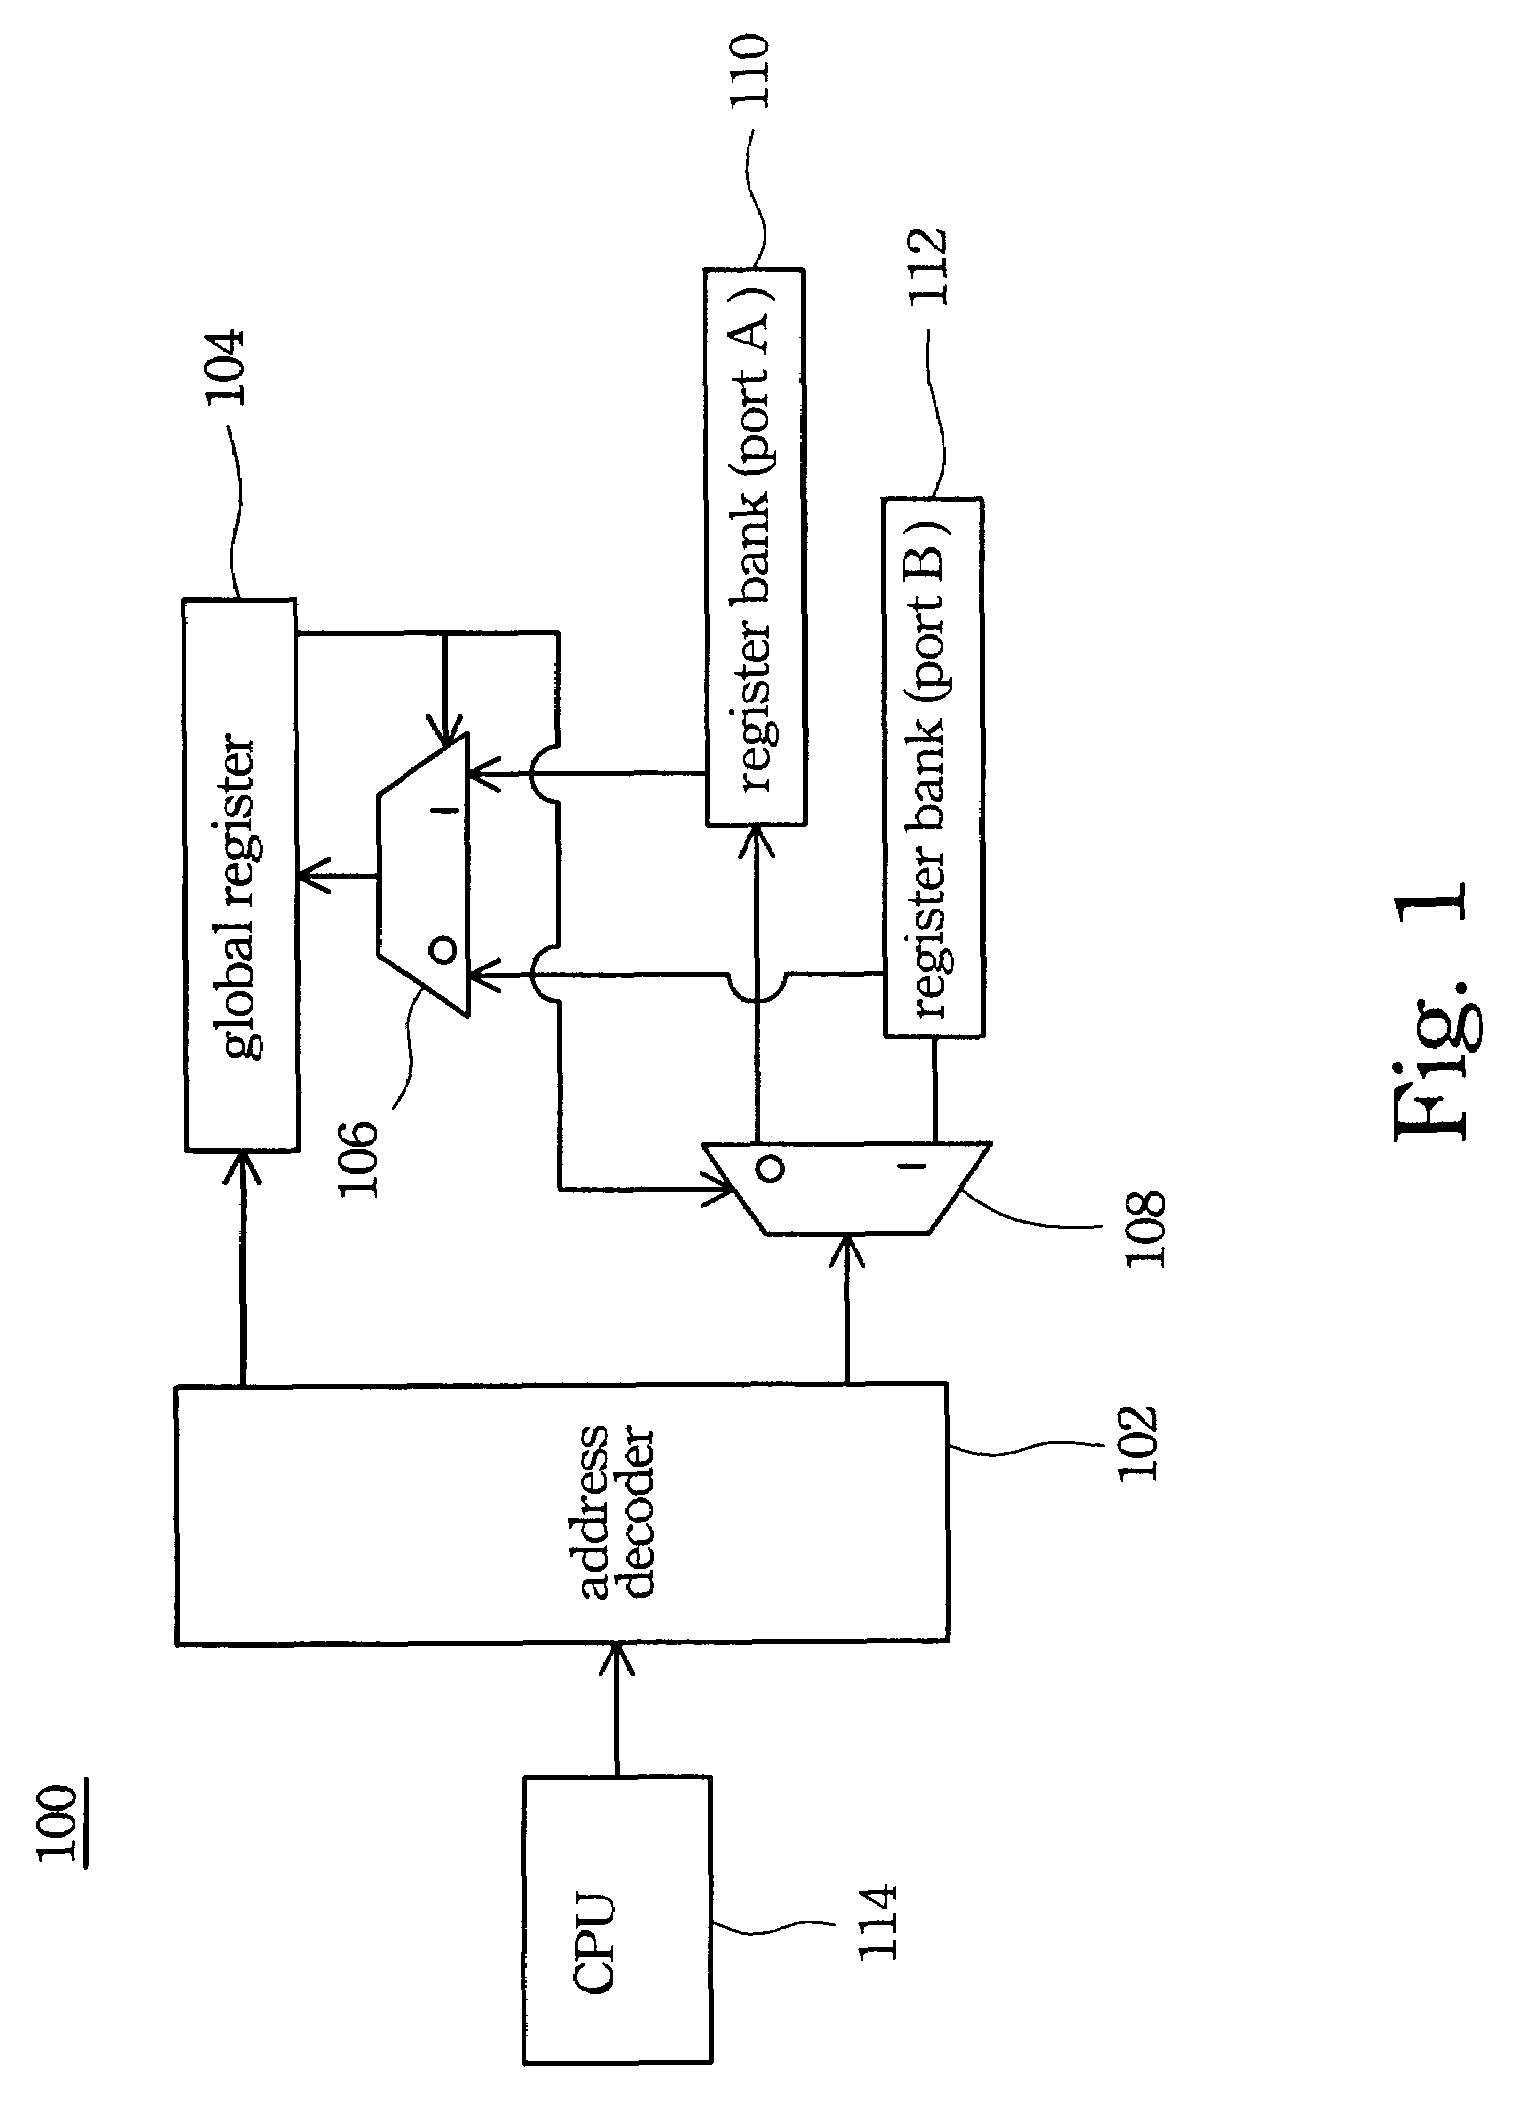 Easy access port structure and access method